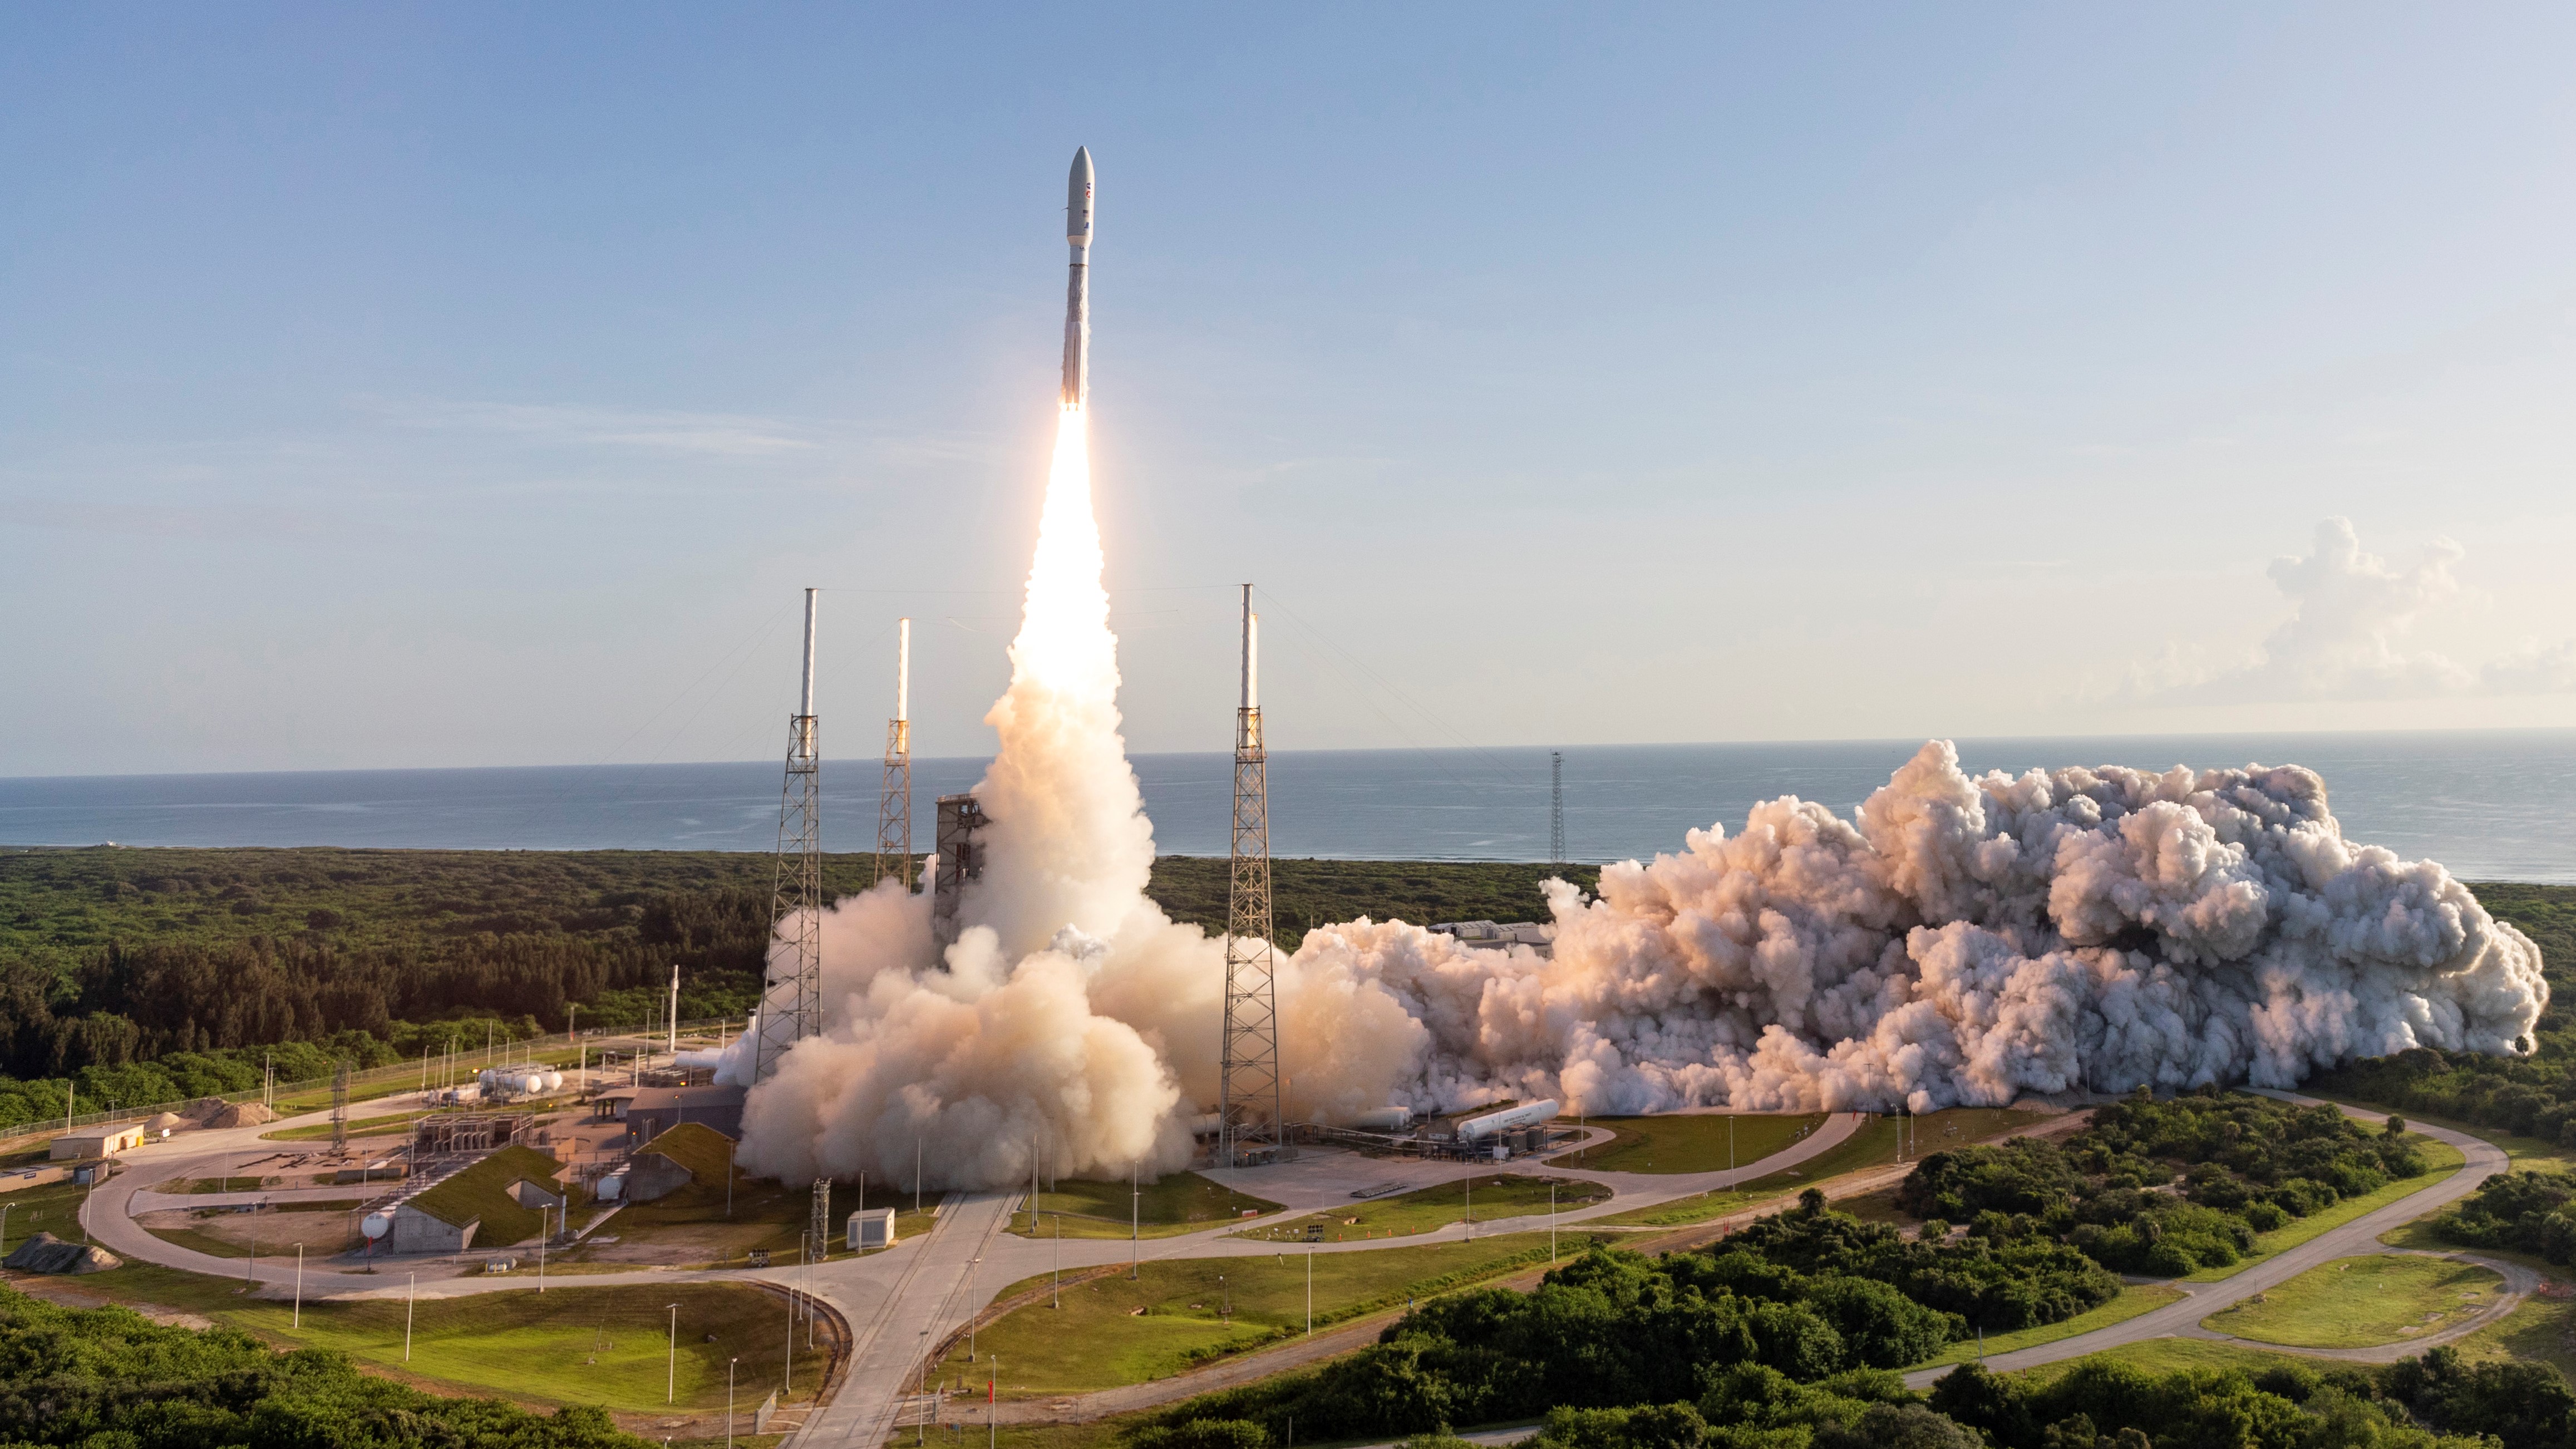 Close approach provides a launch opportunity window for missions to Mars. Here NASA’s Mars 2020 mission launches from Space Launch Complex-41 on Jul. 30, 2020, carrying the Perseverance rover.